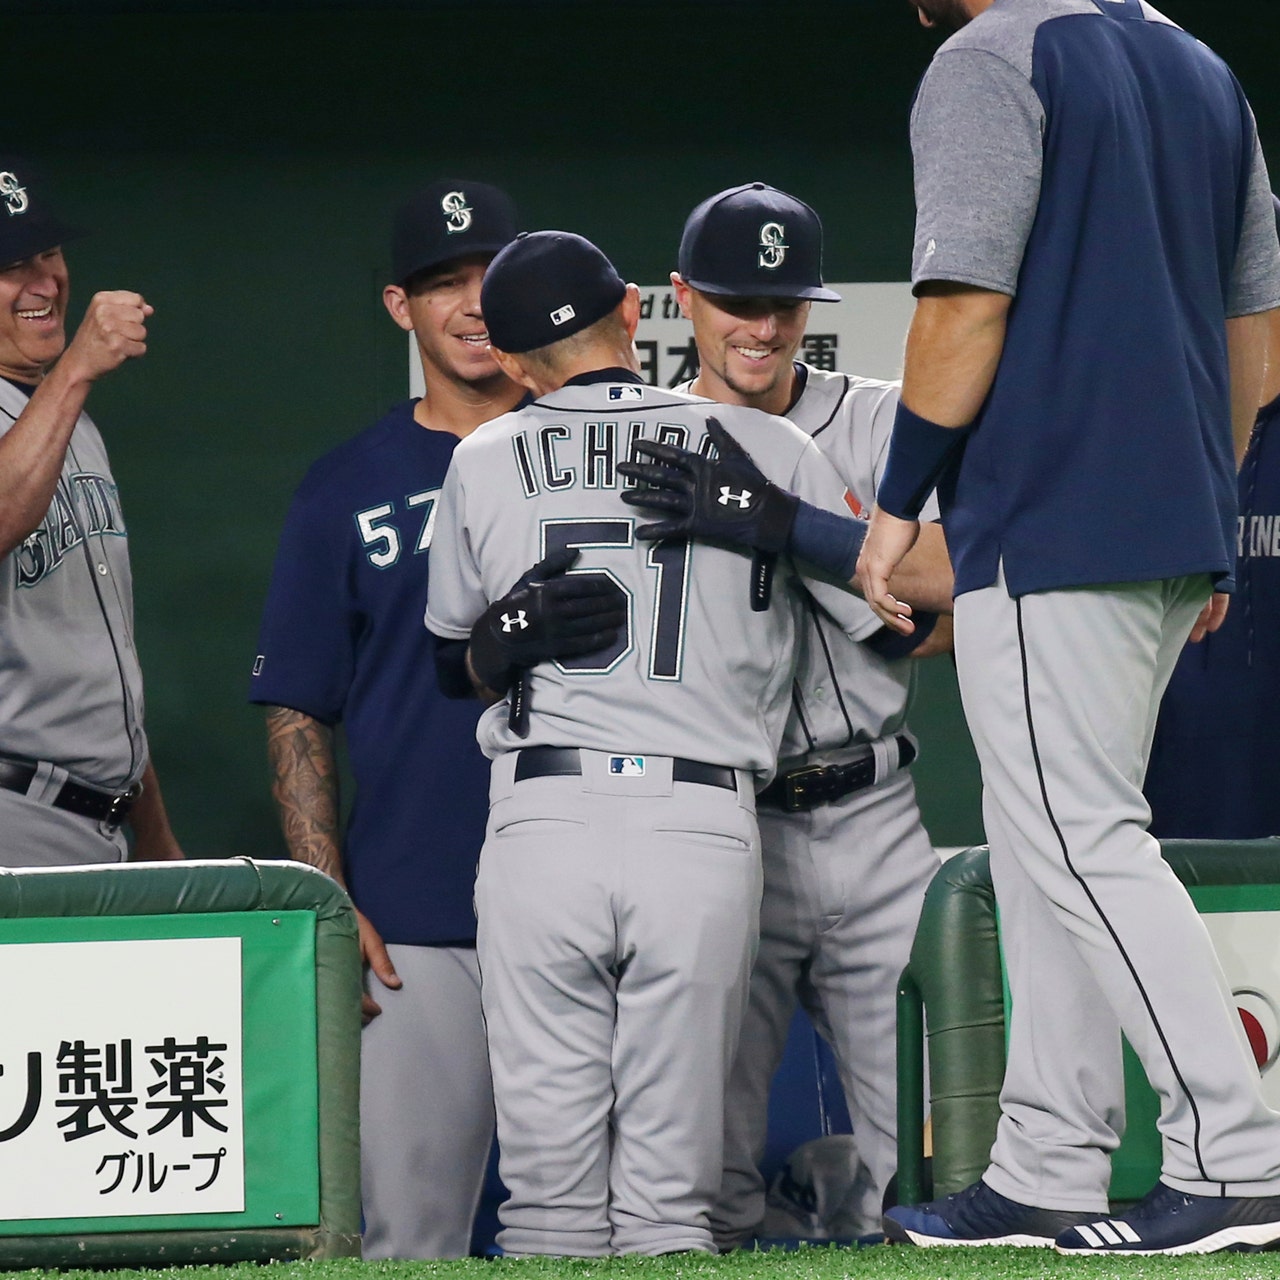 Ichiro gets the start in what could be his last MLB game